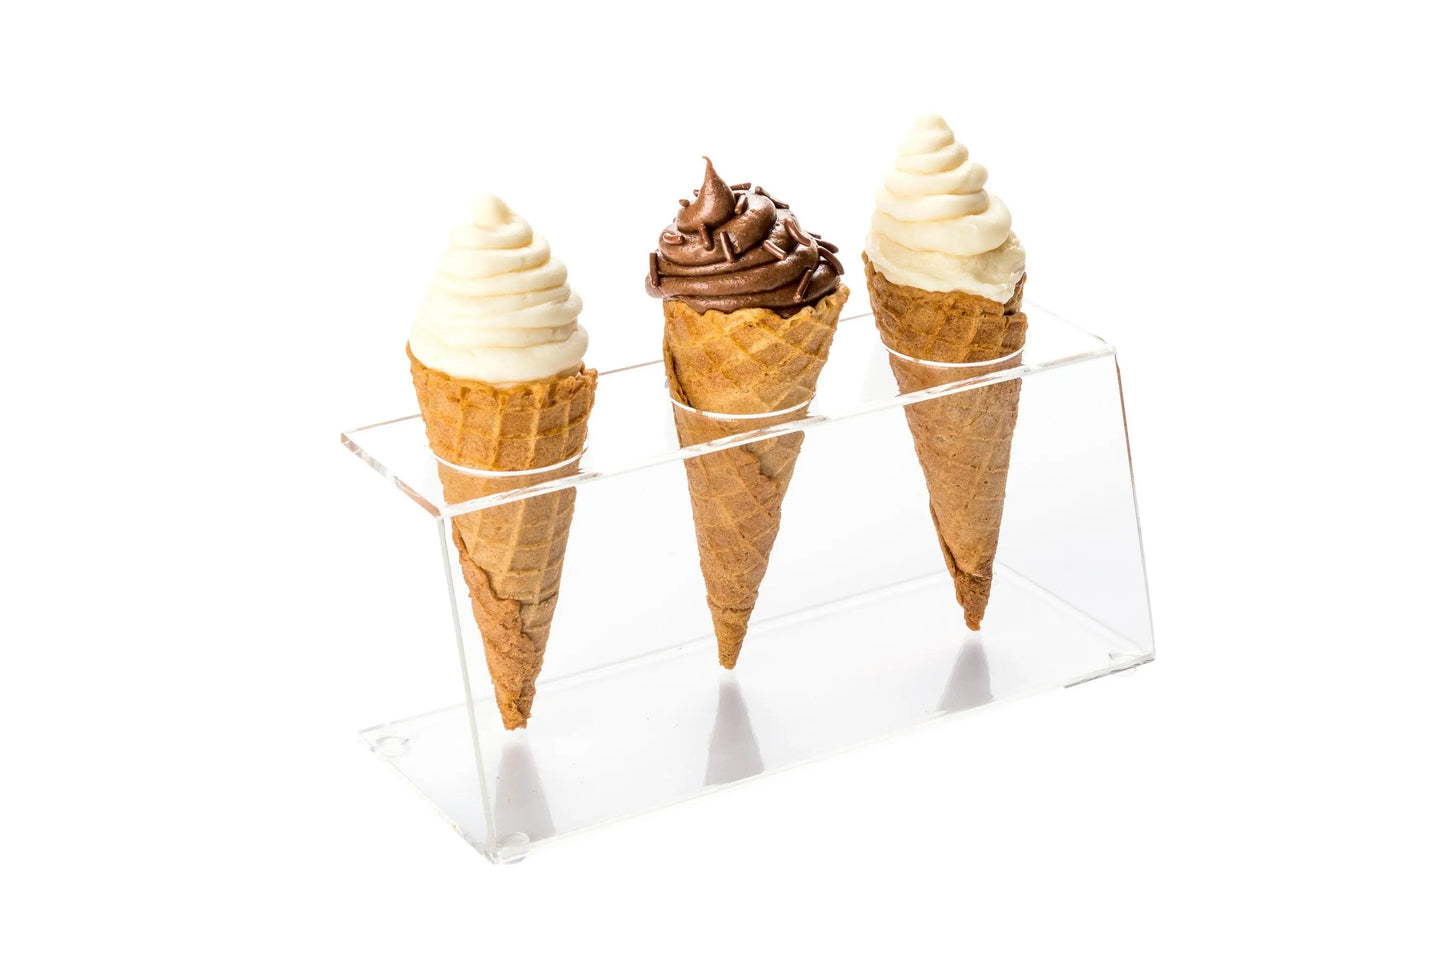 Clear Tek Clear Acrylic Ice Cream Cone Stand - 3 slots - 7" x 2 3/4" x 3 1/4" - 1 count box - www.ecoware.ae                               